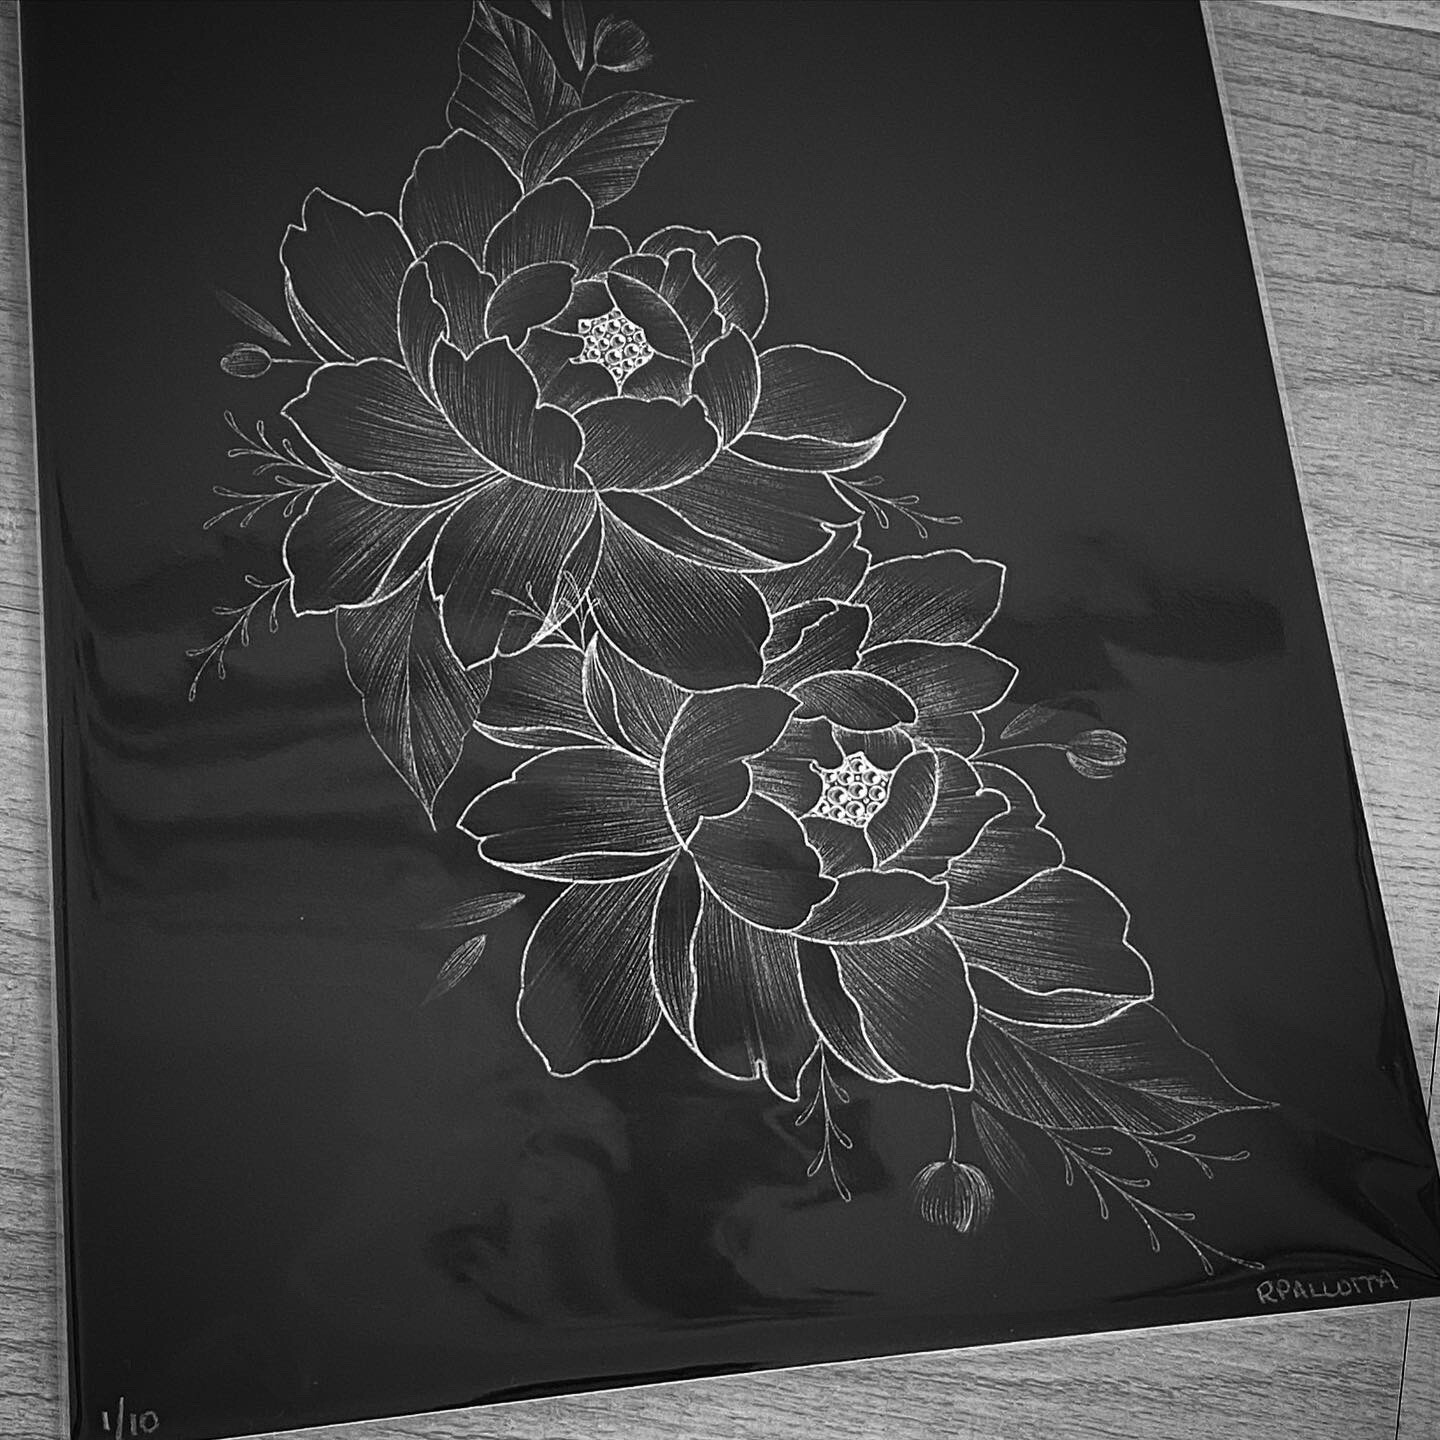 Limited Edition signed and numbered Floral Print #1 - Only 10 available